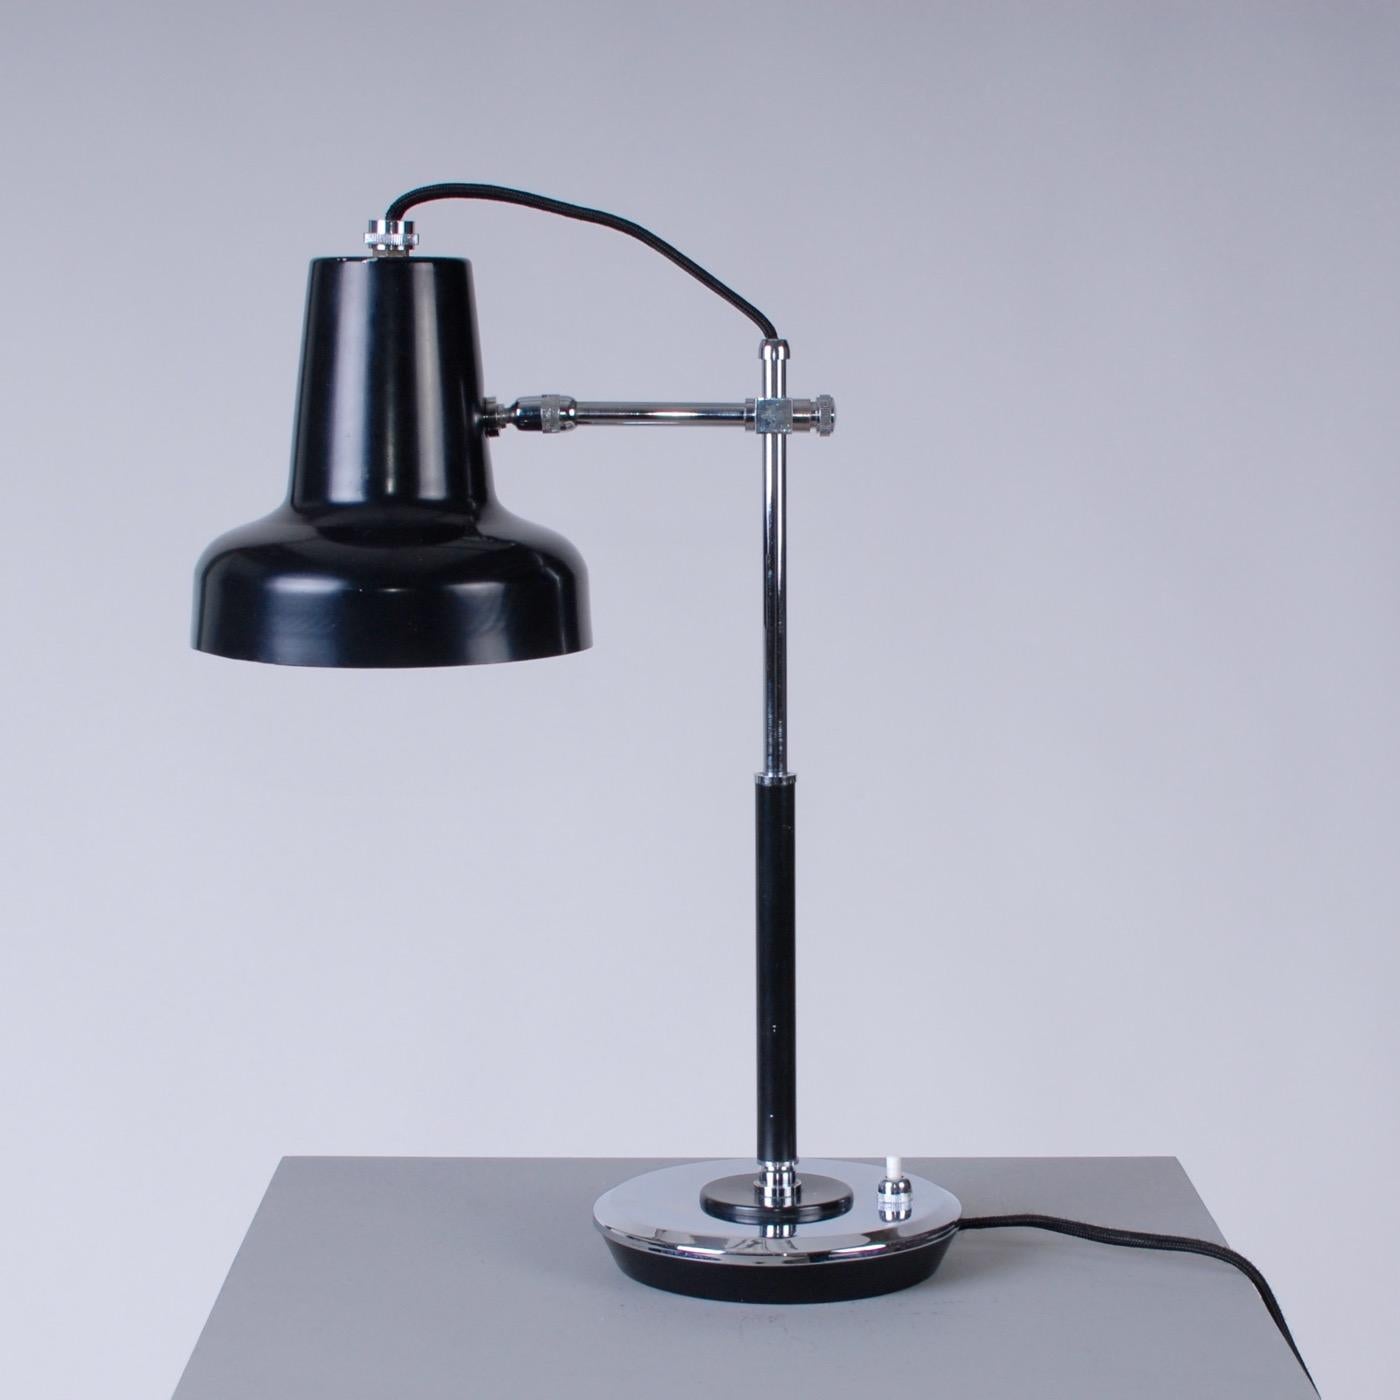 Mid-Century Modern 1950s Black and Chrome Lacquered Italian Desk Lamp In Good Condition For Sale In Oslo, NO